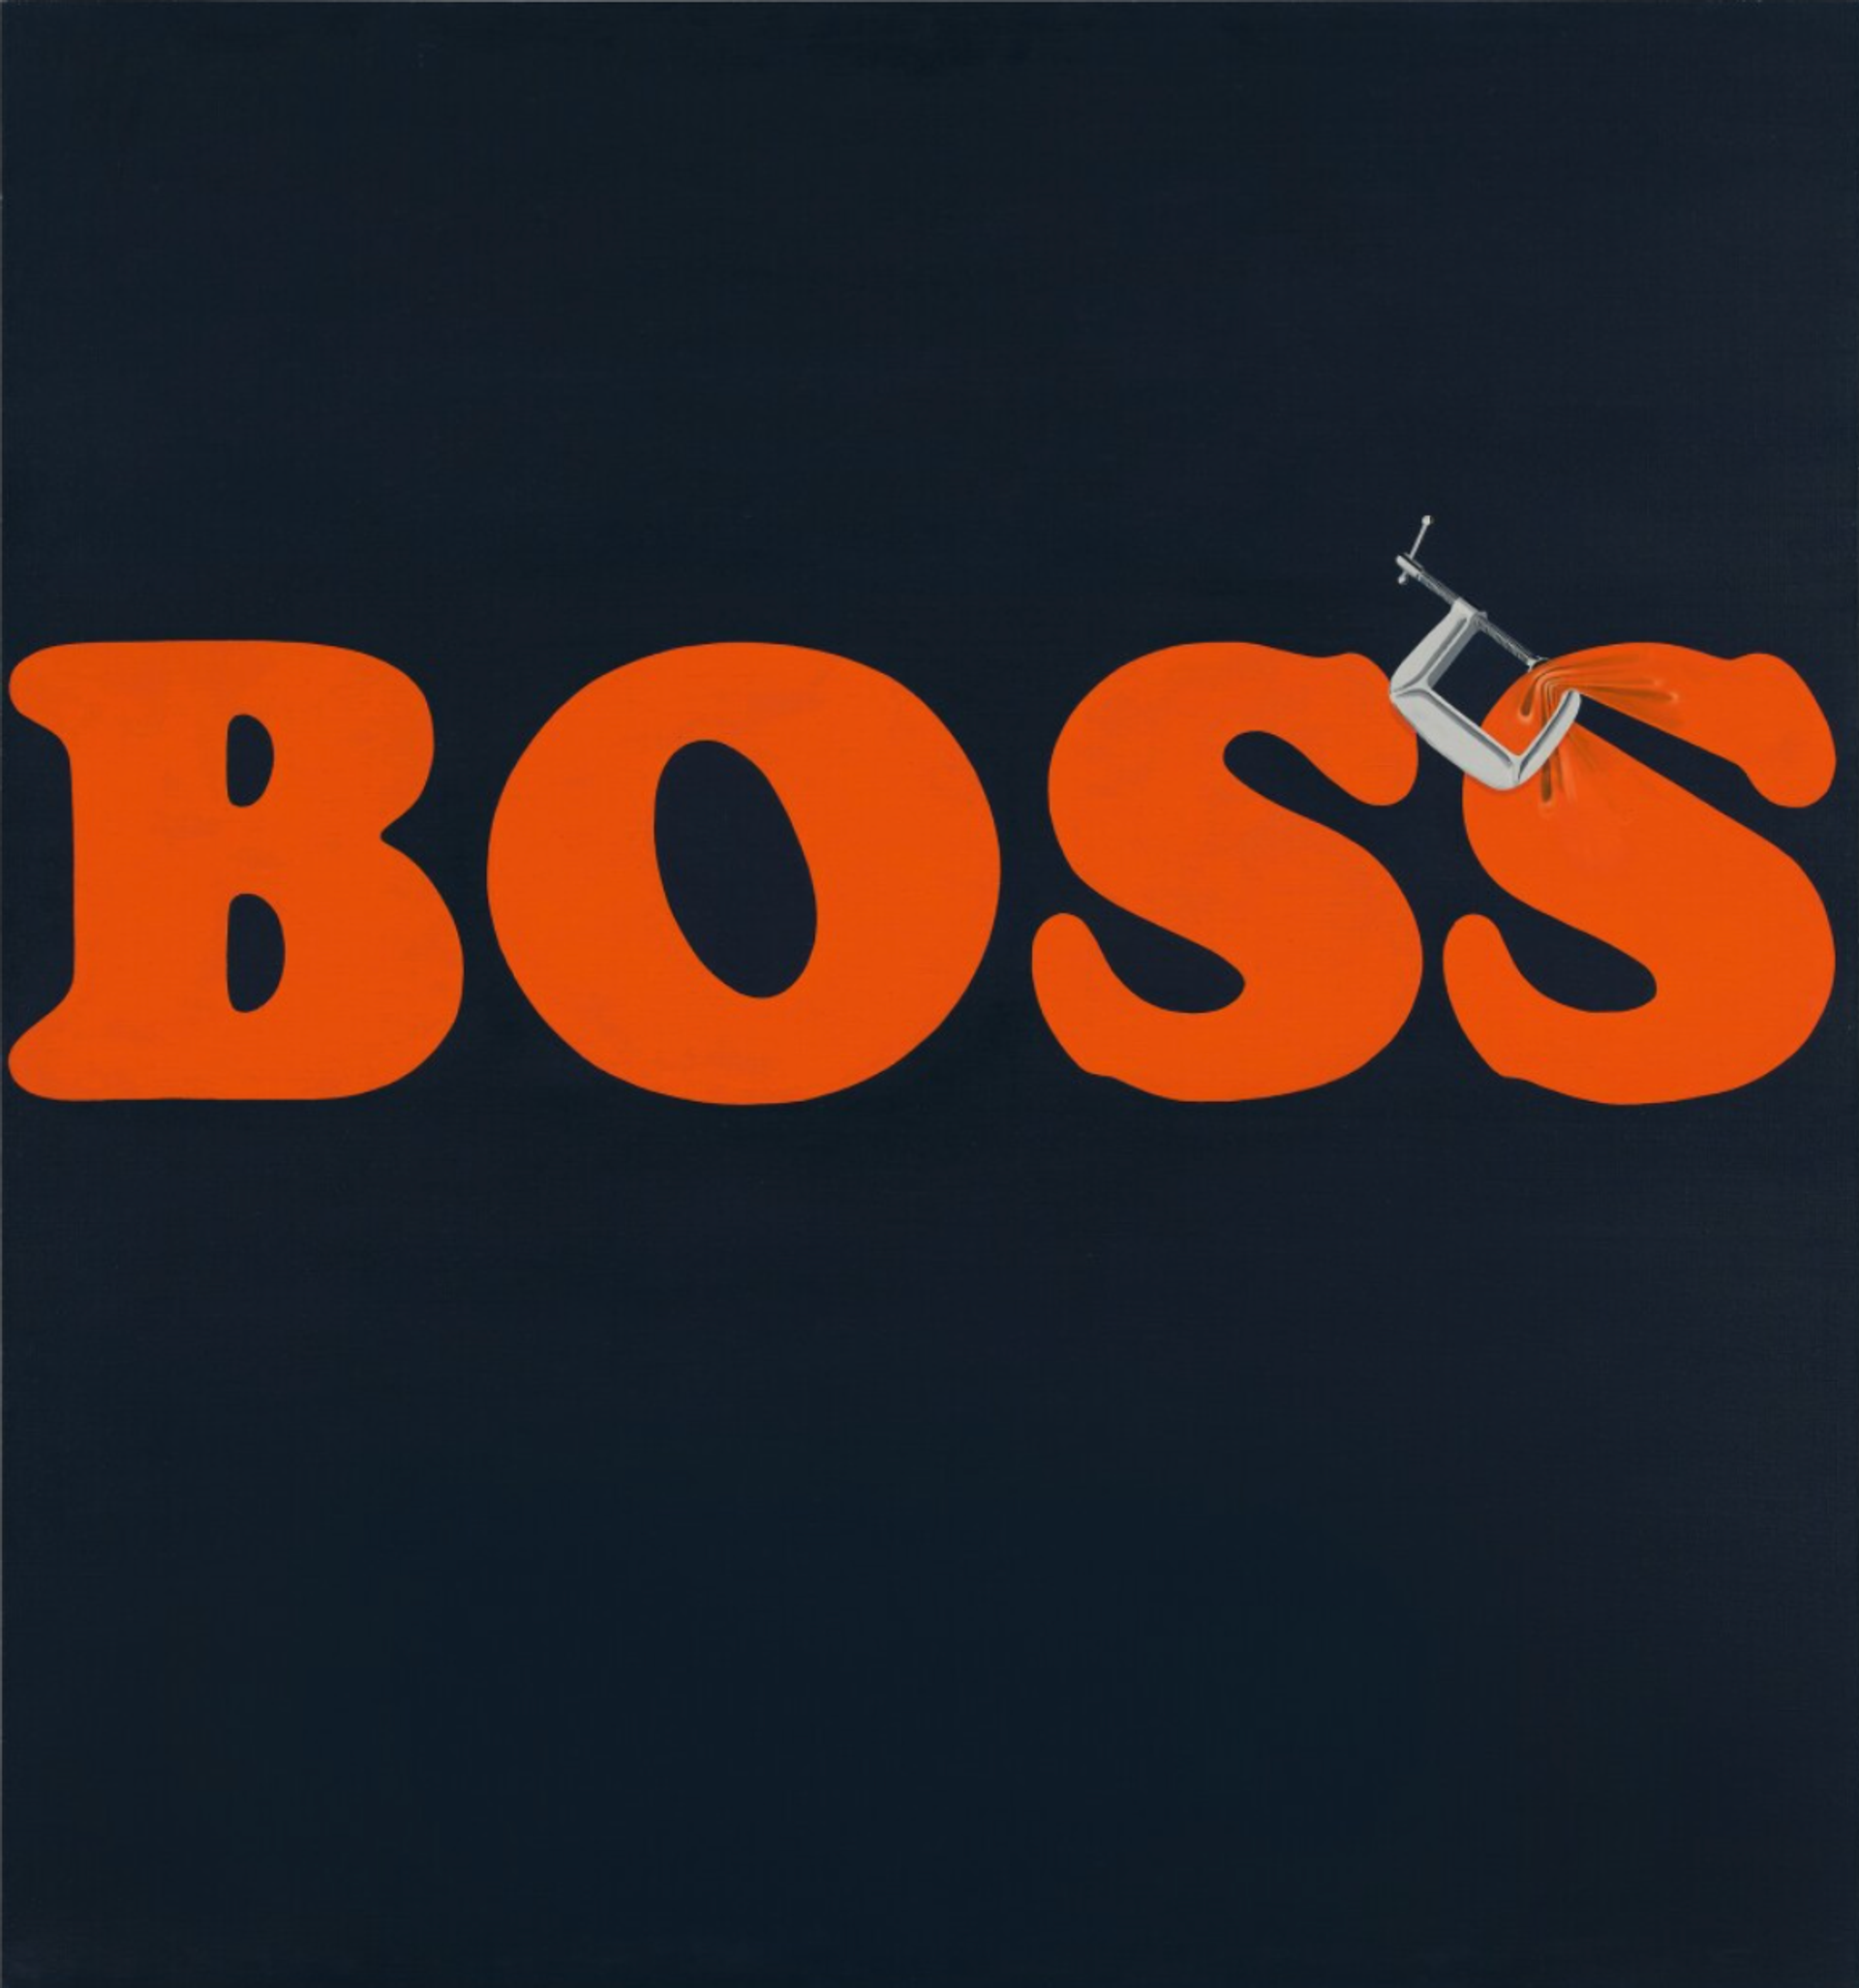 Painting by Ed Ruscha depicting the word 'BOSS' in capitalised, simplistic, bold orange lettering against a dark blue background. There is a clamp on the final letter 's', distorting the shape of the letter.